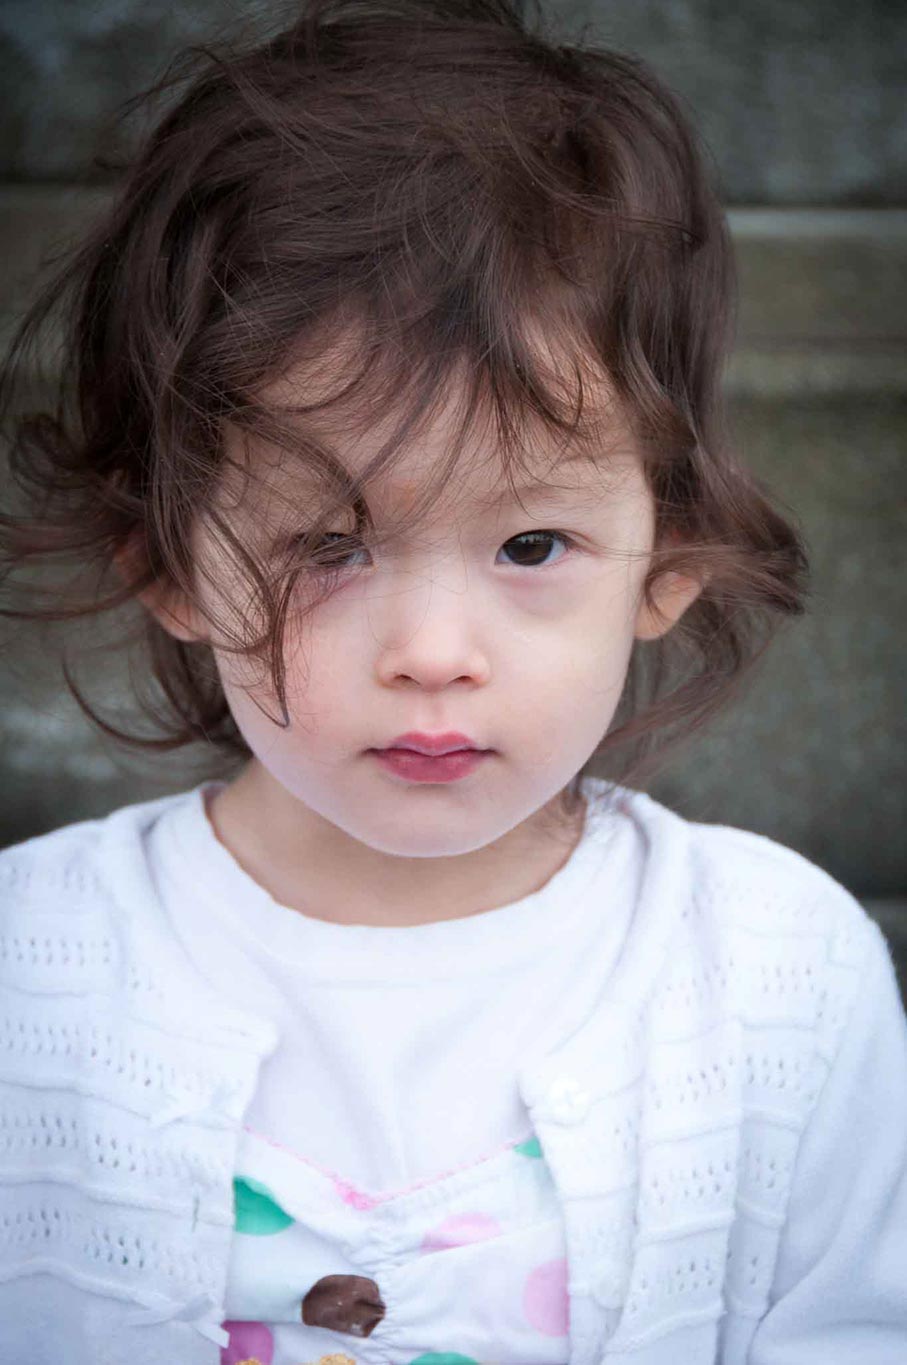 portrait of little girl with a piercing gaze in white sweater.